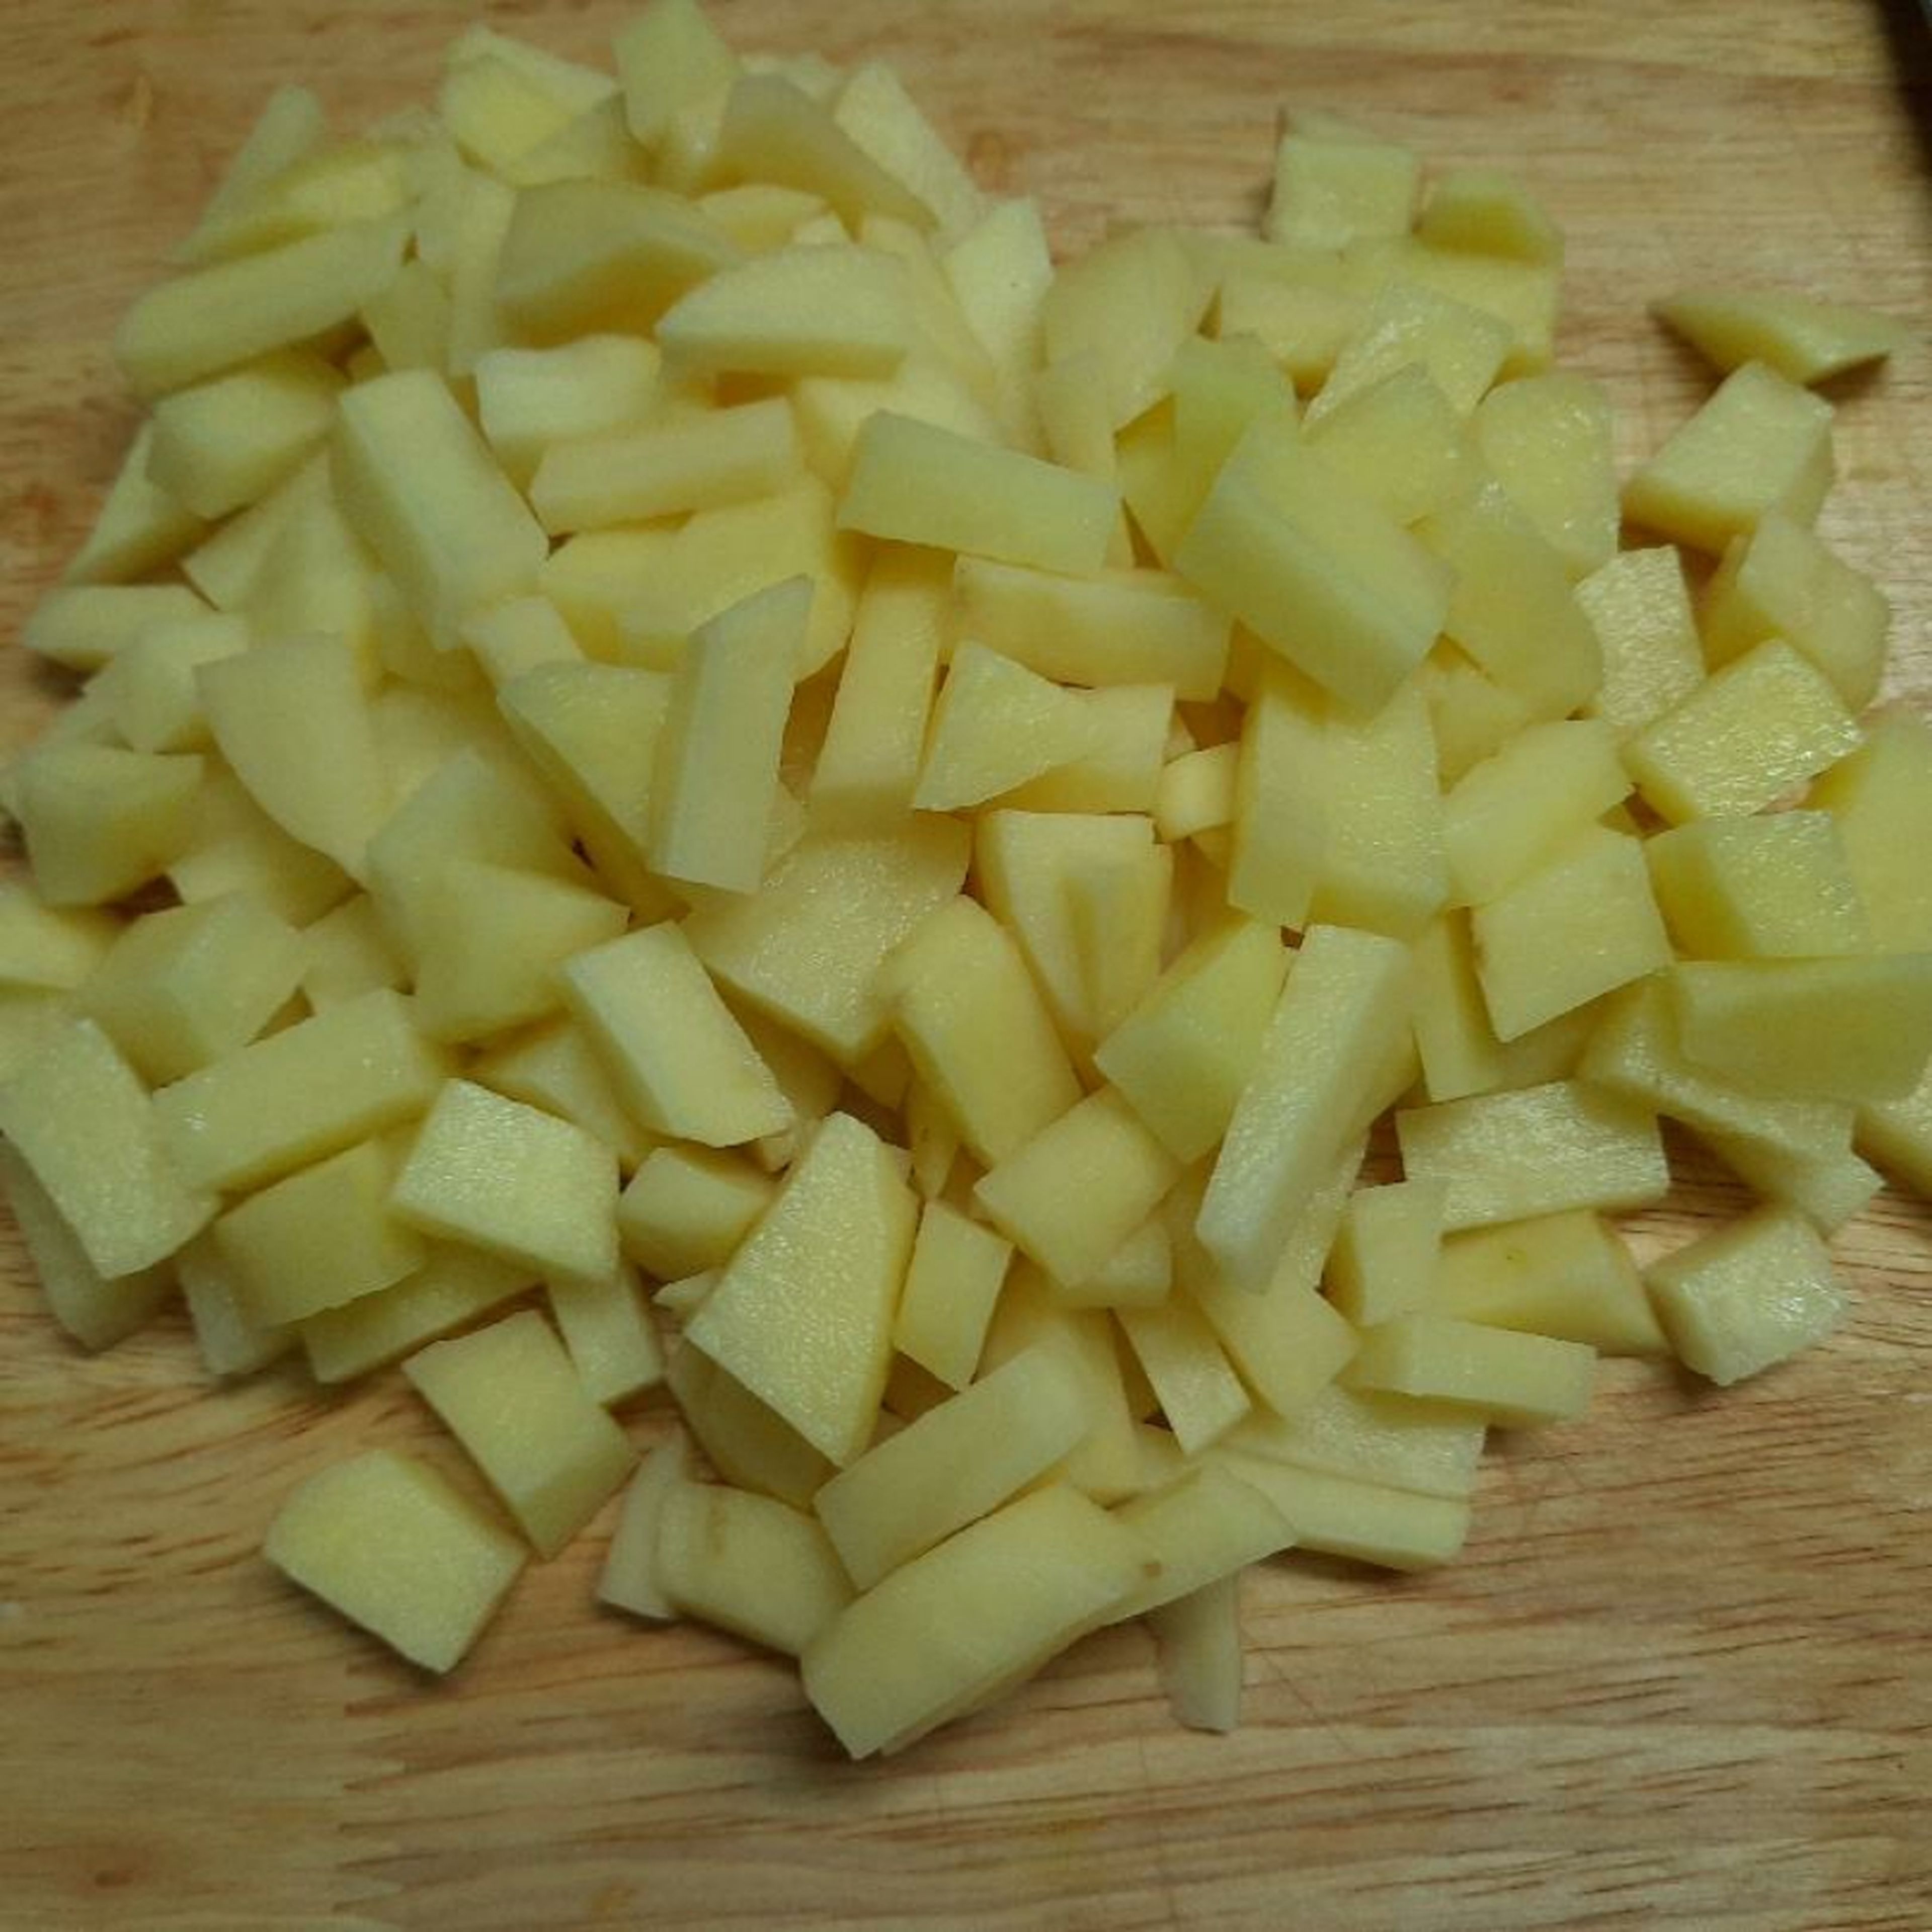 Cut the potatoes into long pieces.